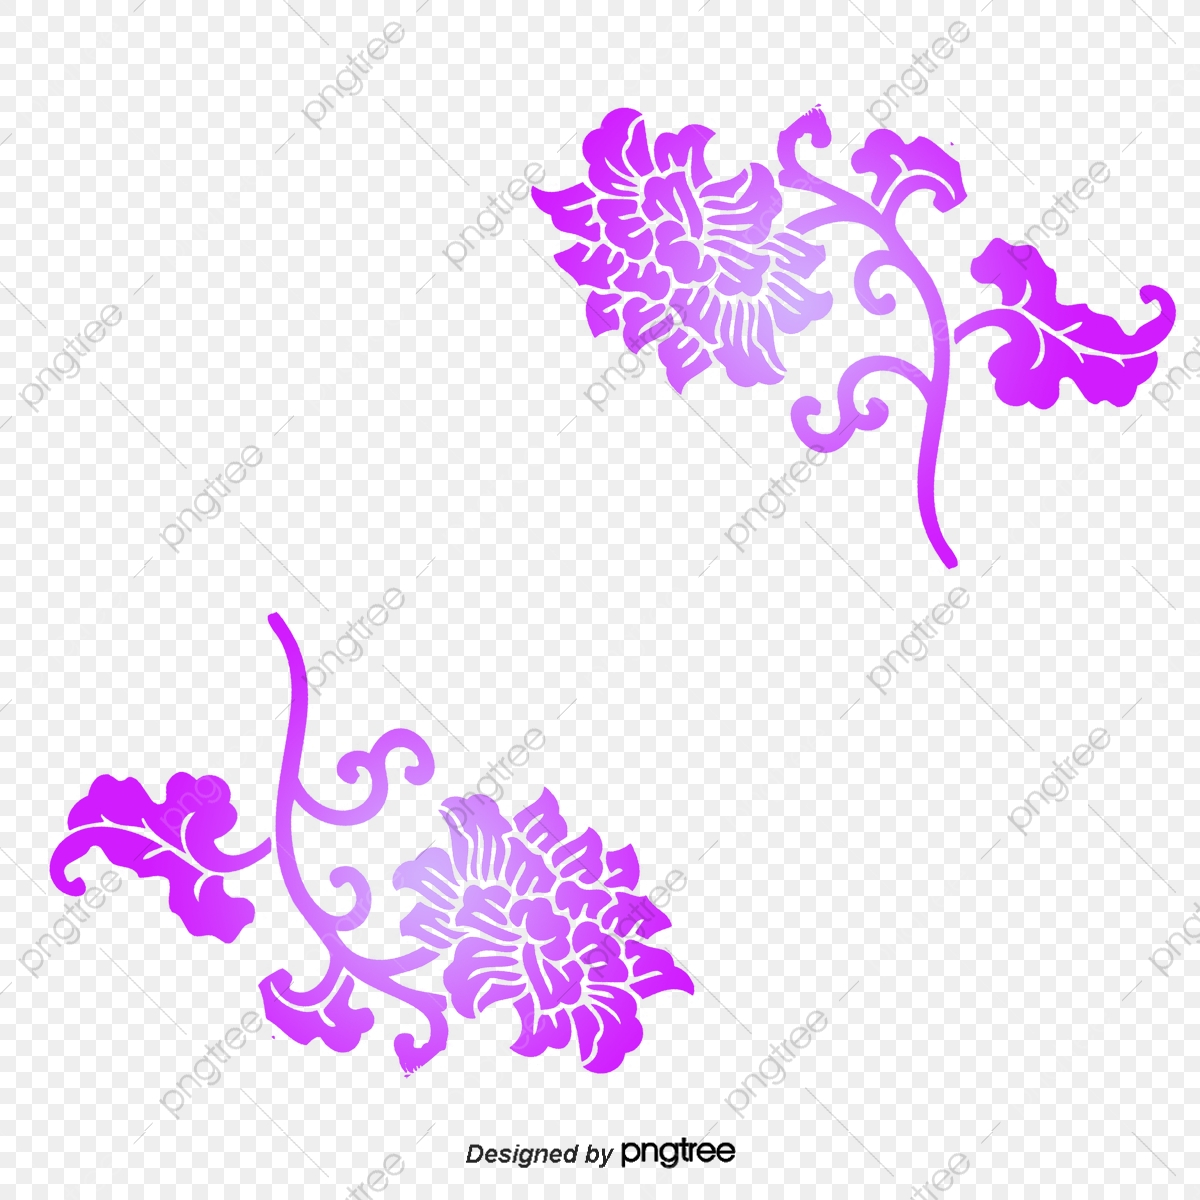 Scandinavian Embroidery Patterns Free Vector Embroidery Patterns Plant Flowers Blue And White Png And